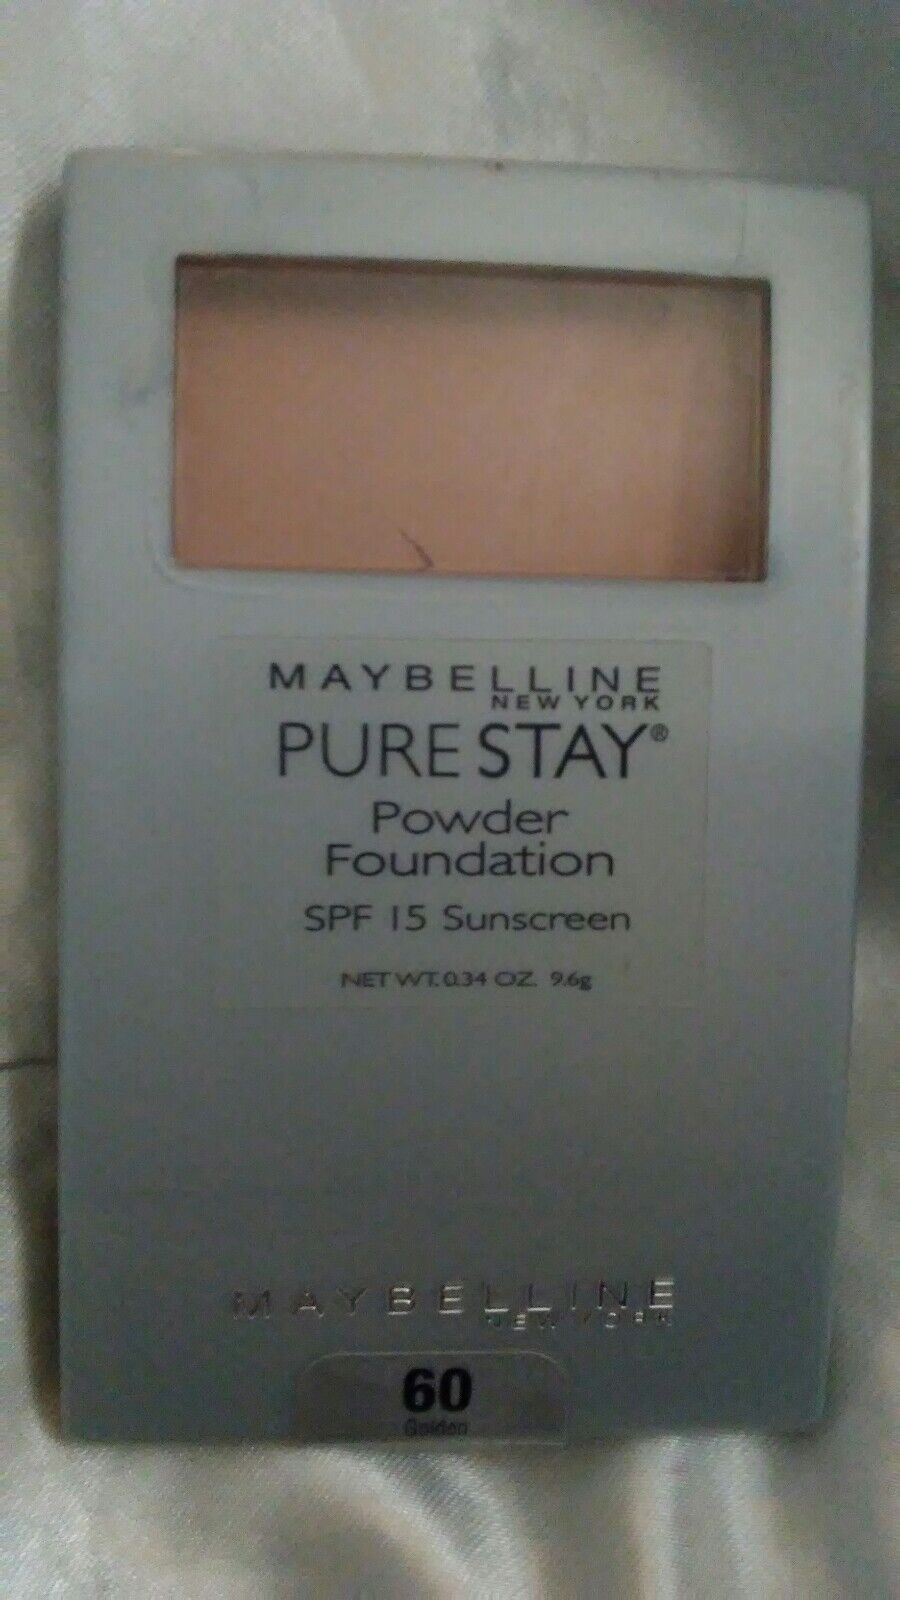 MAYBELLINE PURE STAY POWDER FOUNDATION GOLDEN 60 (see desc)